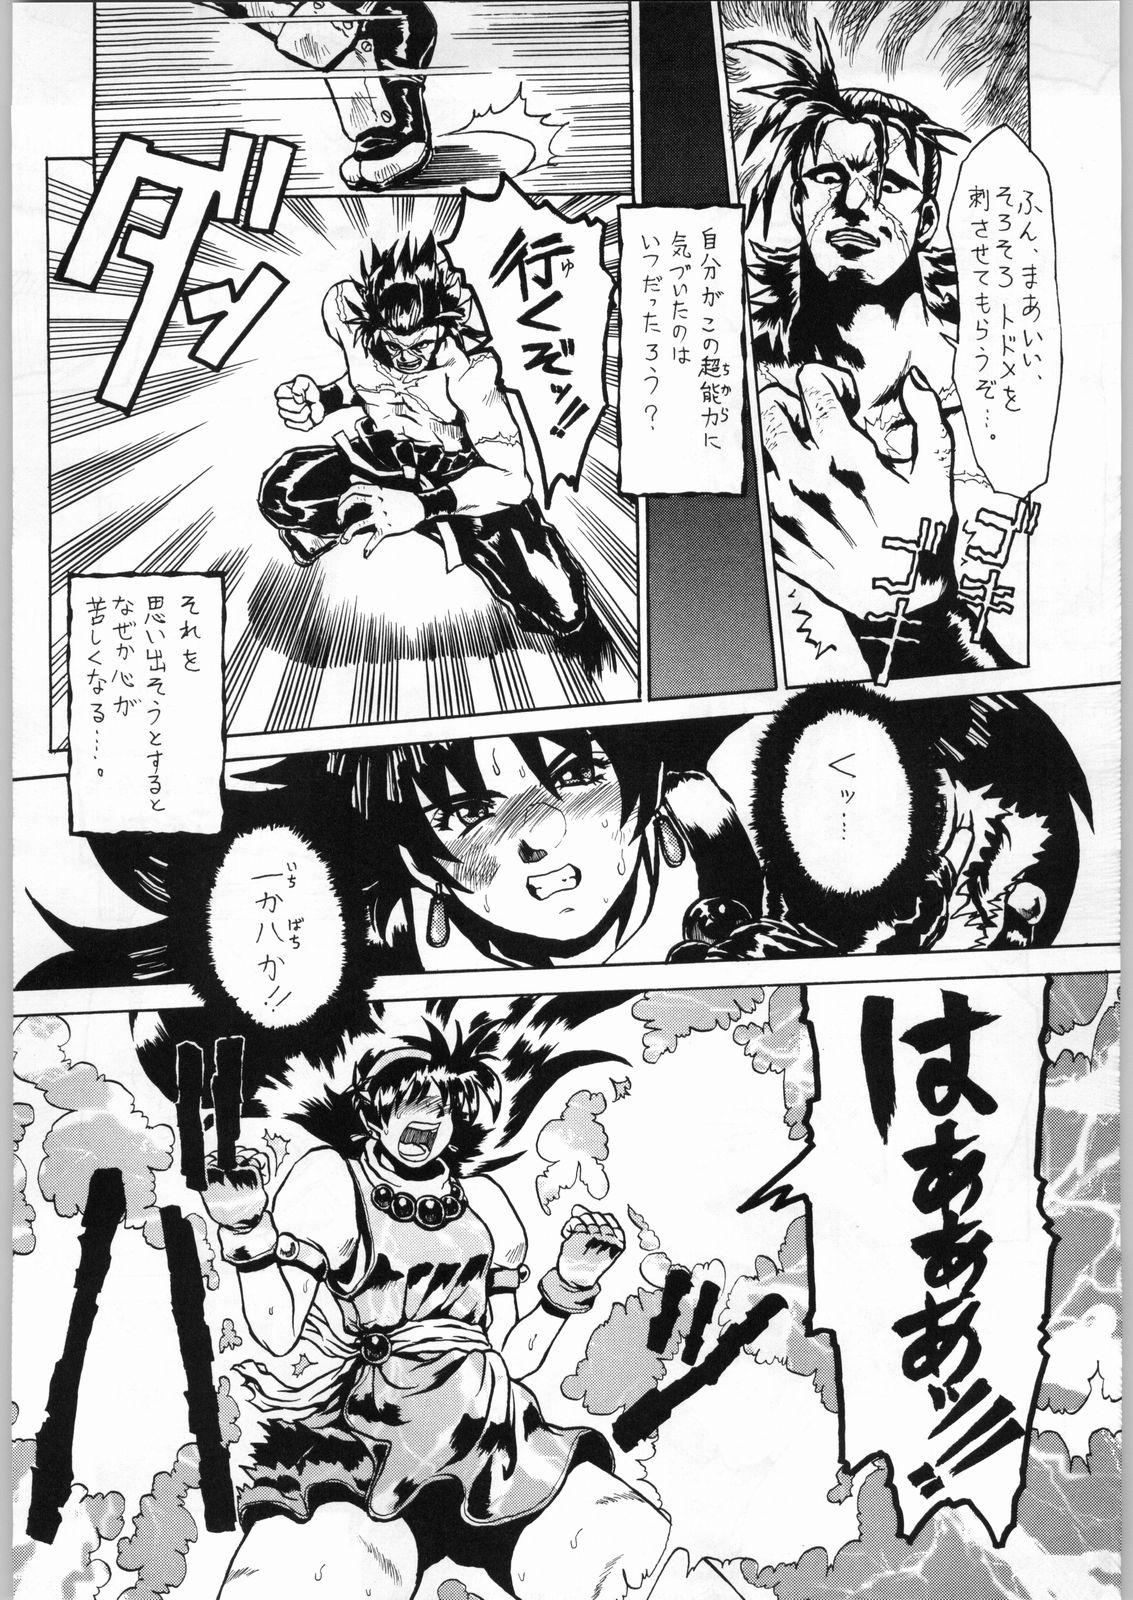 18 Year Old Shikiyoku Hokkedan 8 - King of fighters Valkyrie no bouken Hidden Cam - Page 6